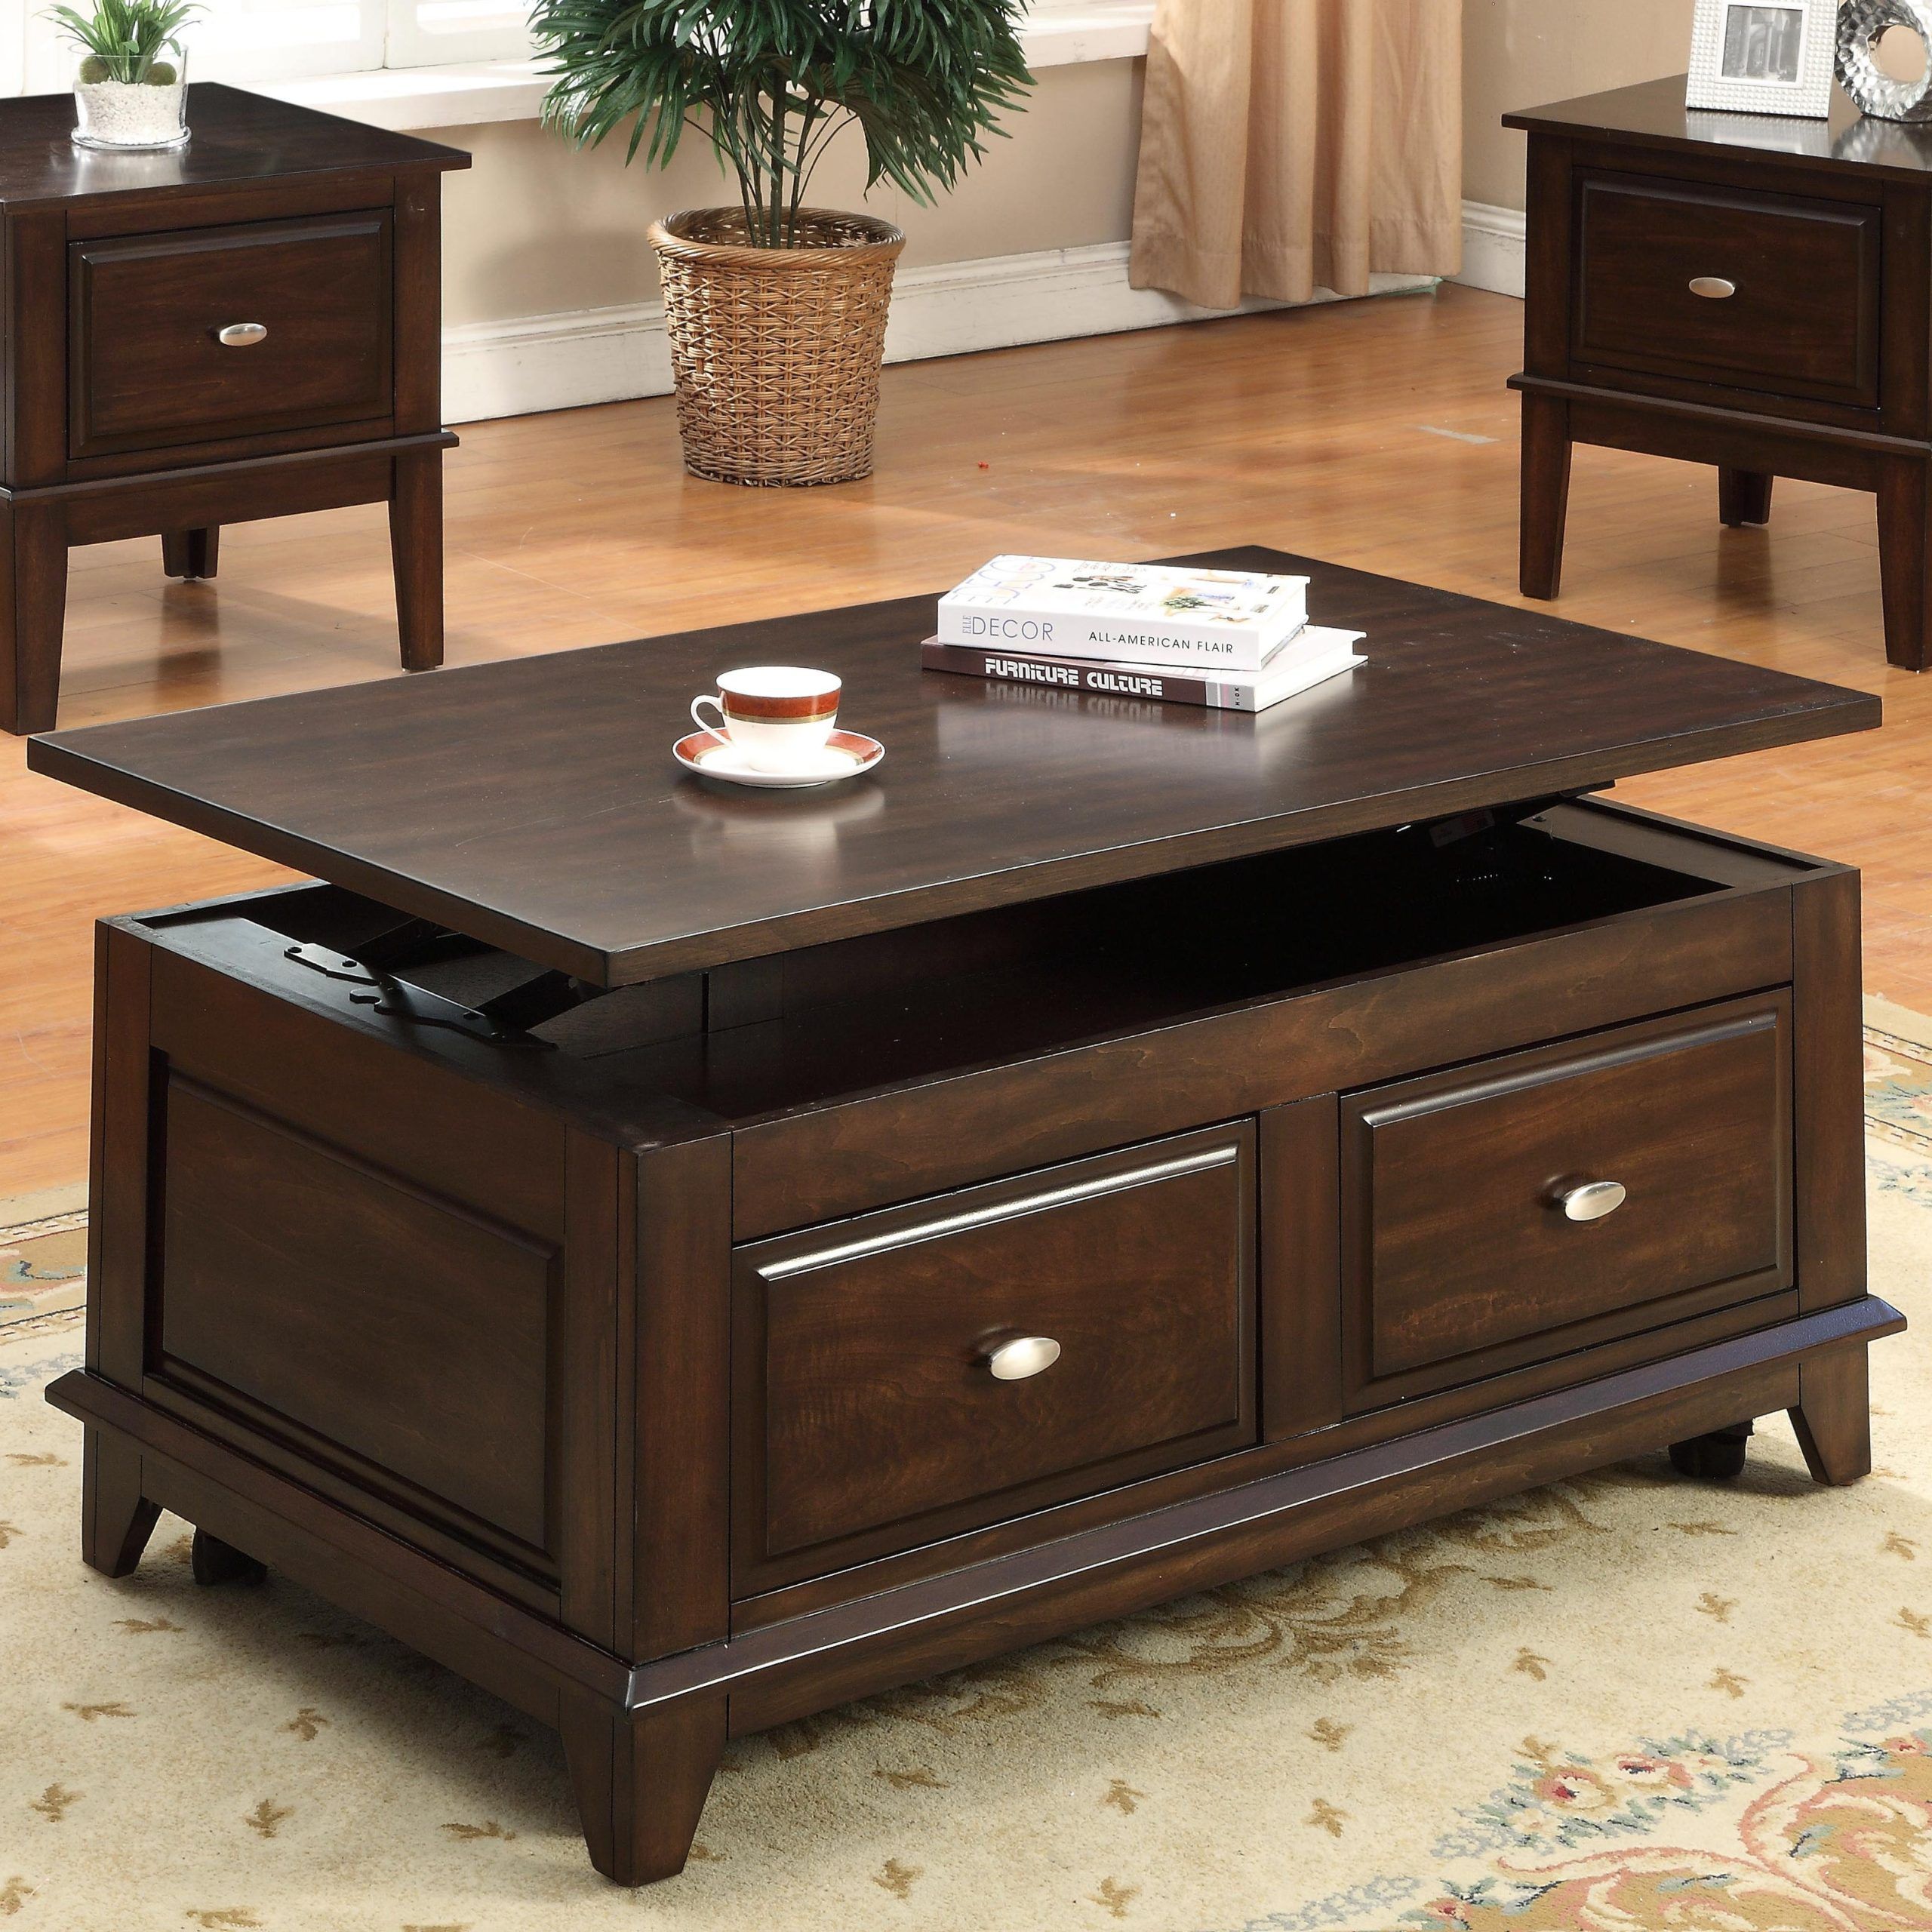 Crown Mark Harmon 4111 01 Lift Top Coffee Table With Casters | Dunk In Lift Top Coffee Tables With Storage (Gallery 7 of 20)